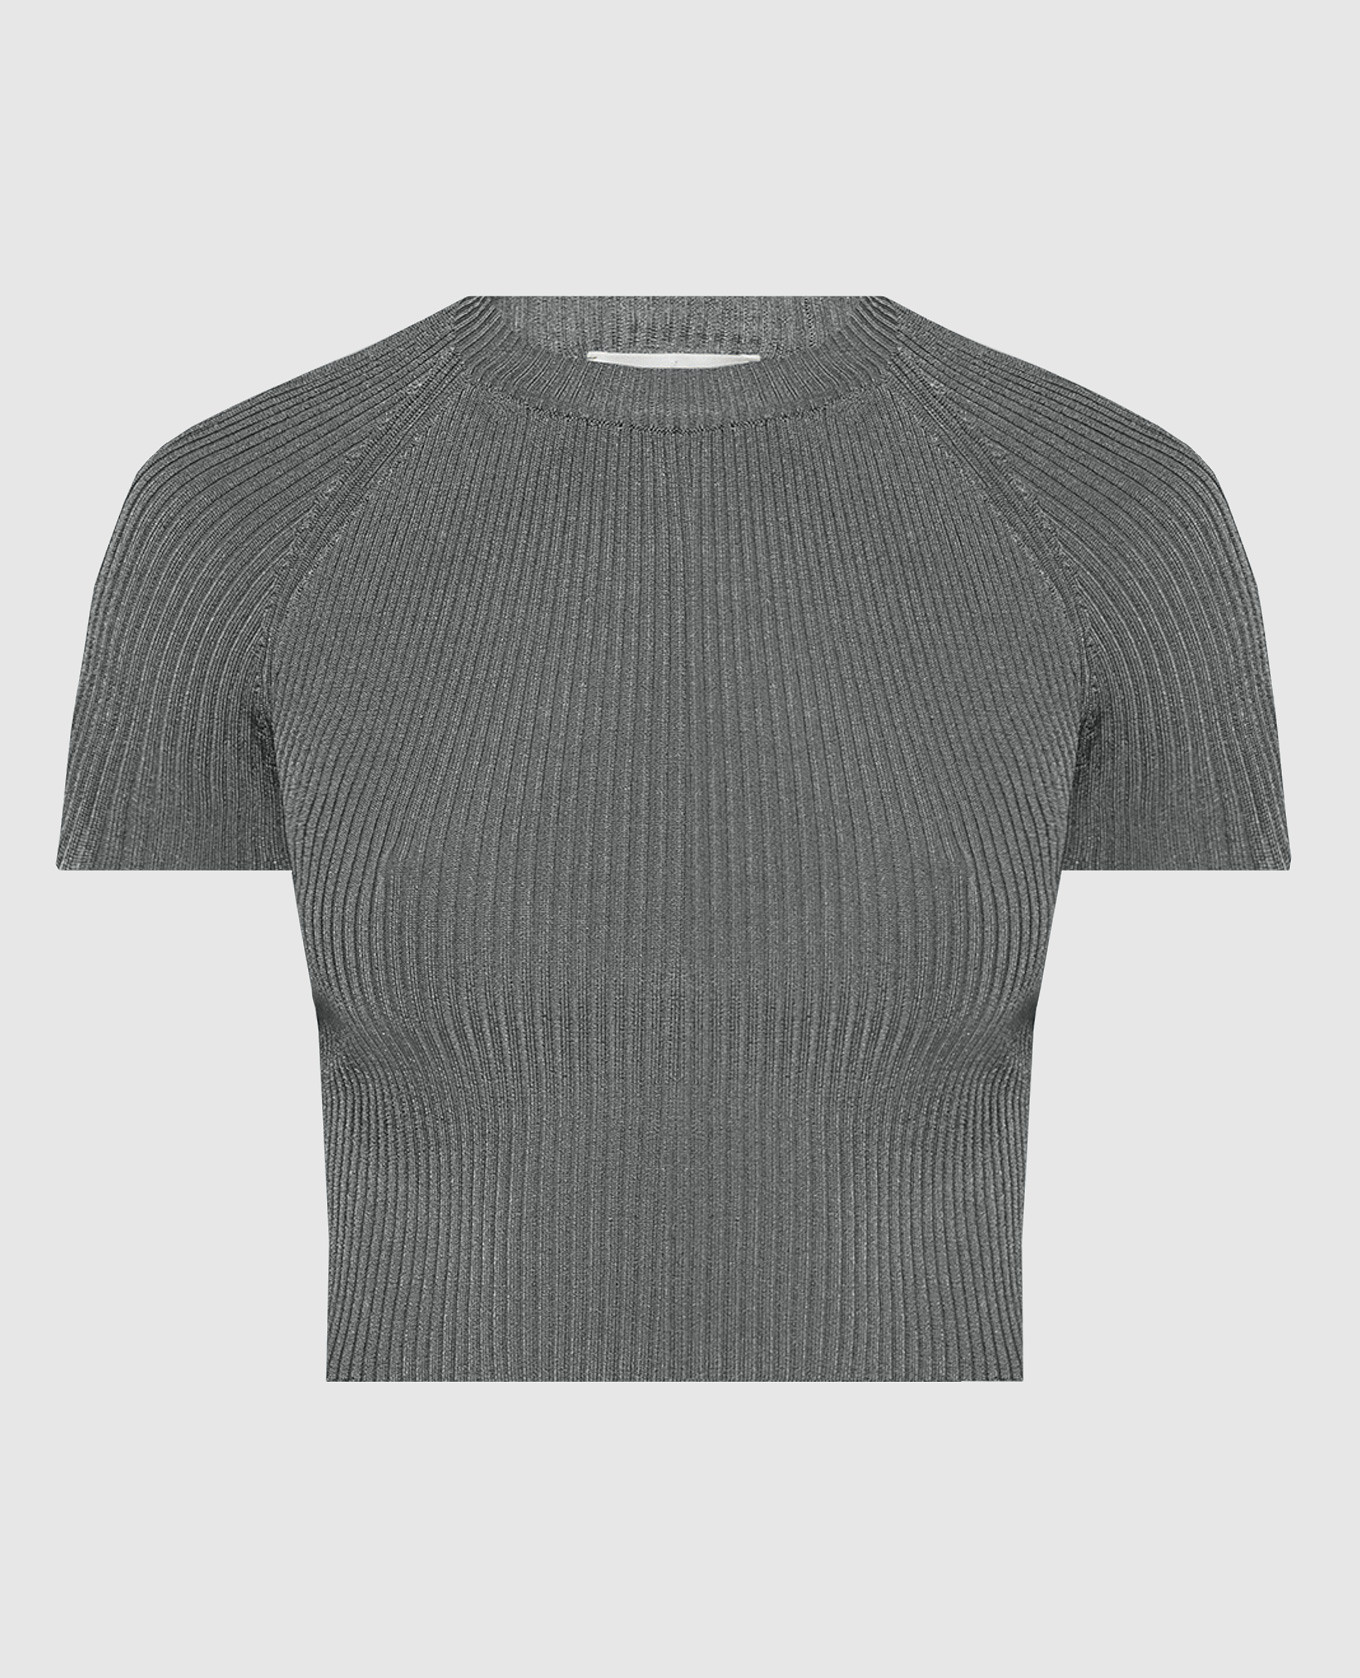 Gray ribbed top with an open back